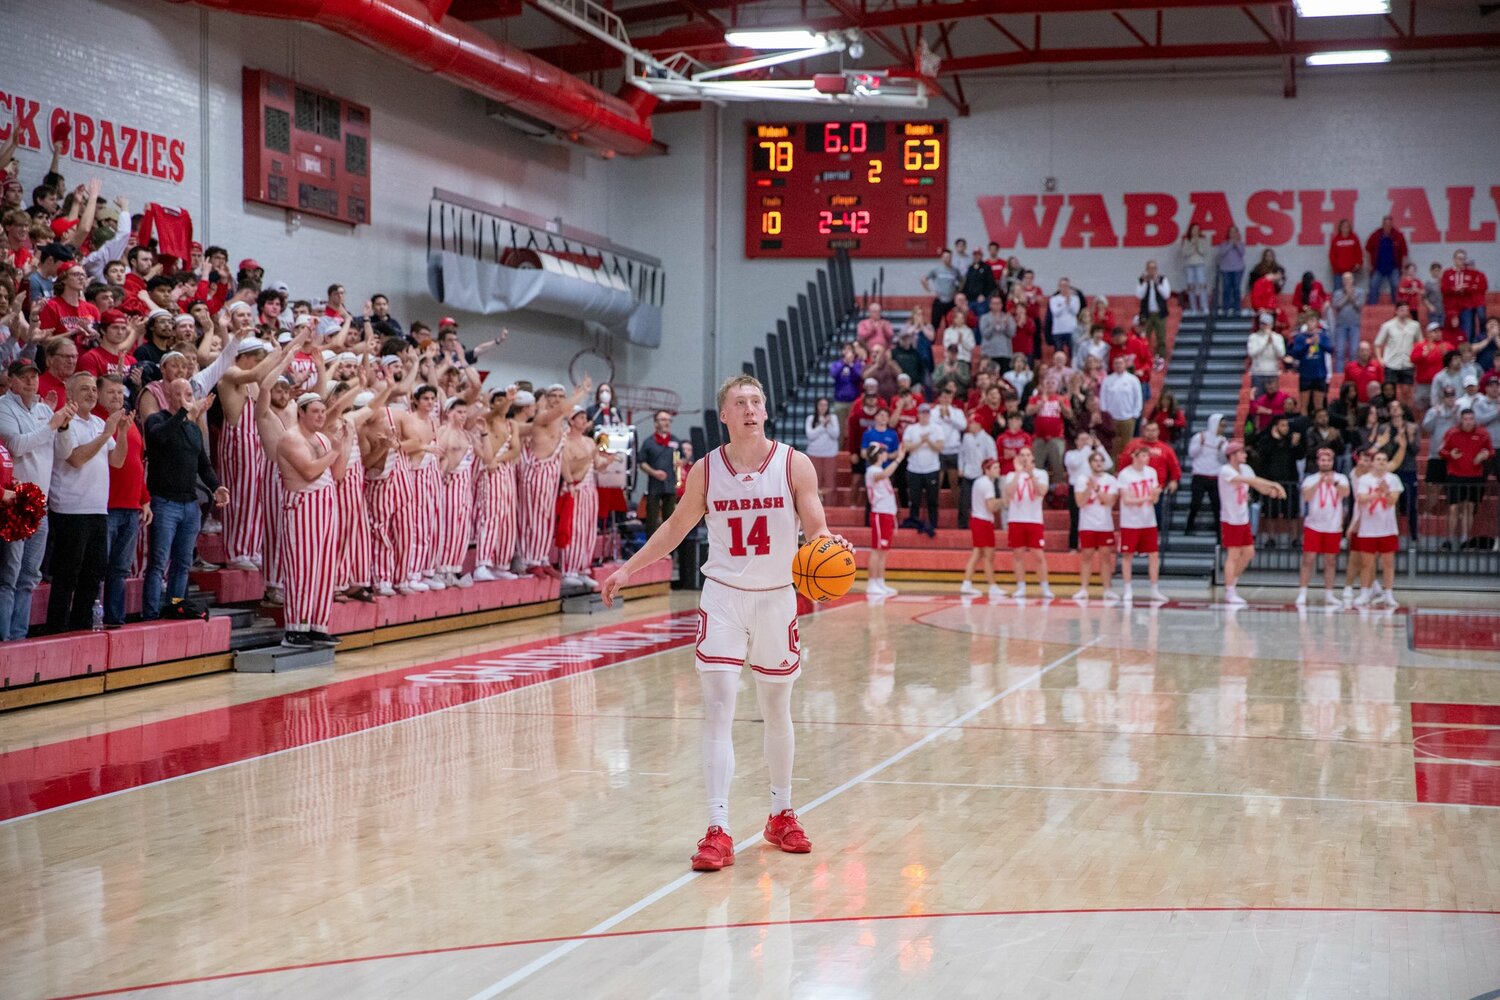 Senior Sam Comer dribbles out the final seconds of Wabash's 78-63 win over Denison in the NCAC semi-finals. For the 3rd straight season Wabash will take on Wooster in the championship game.